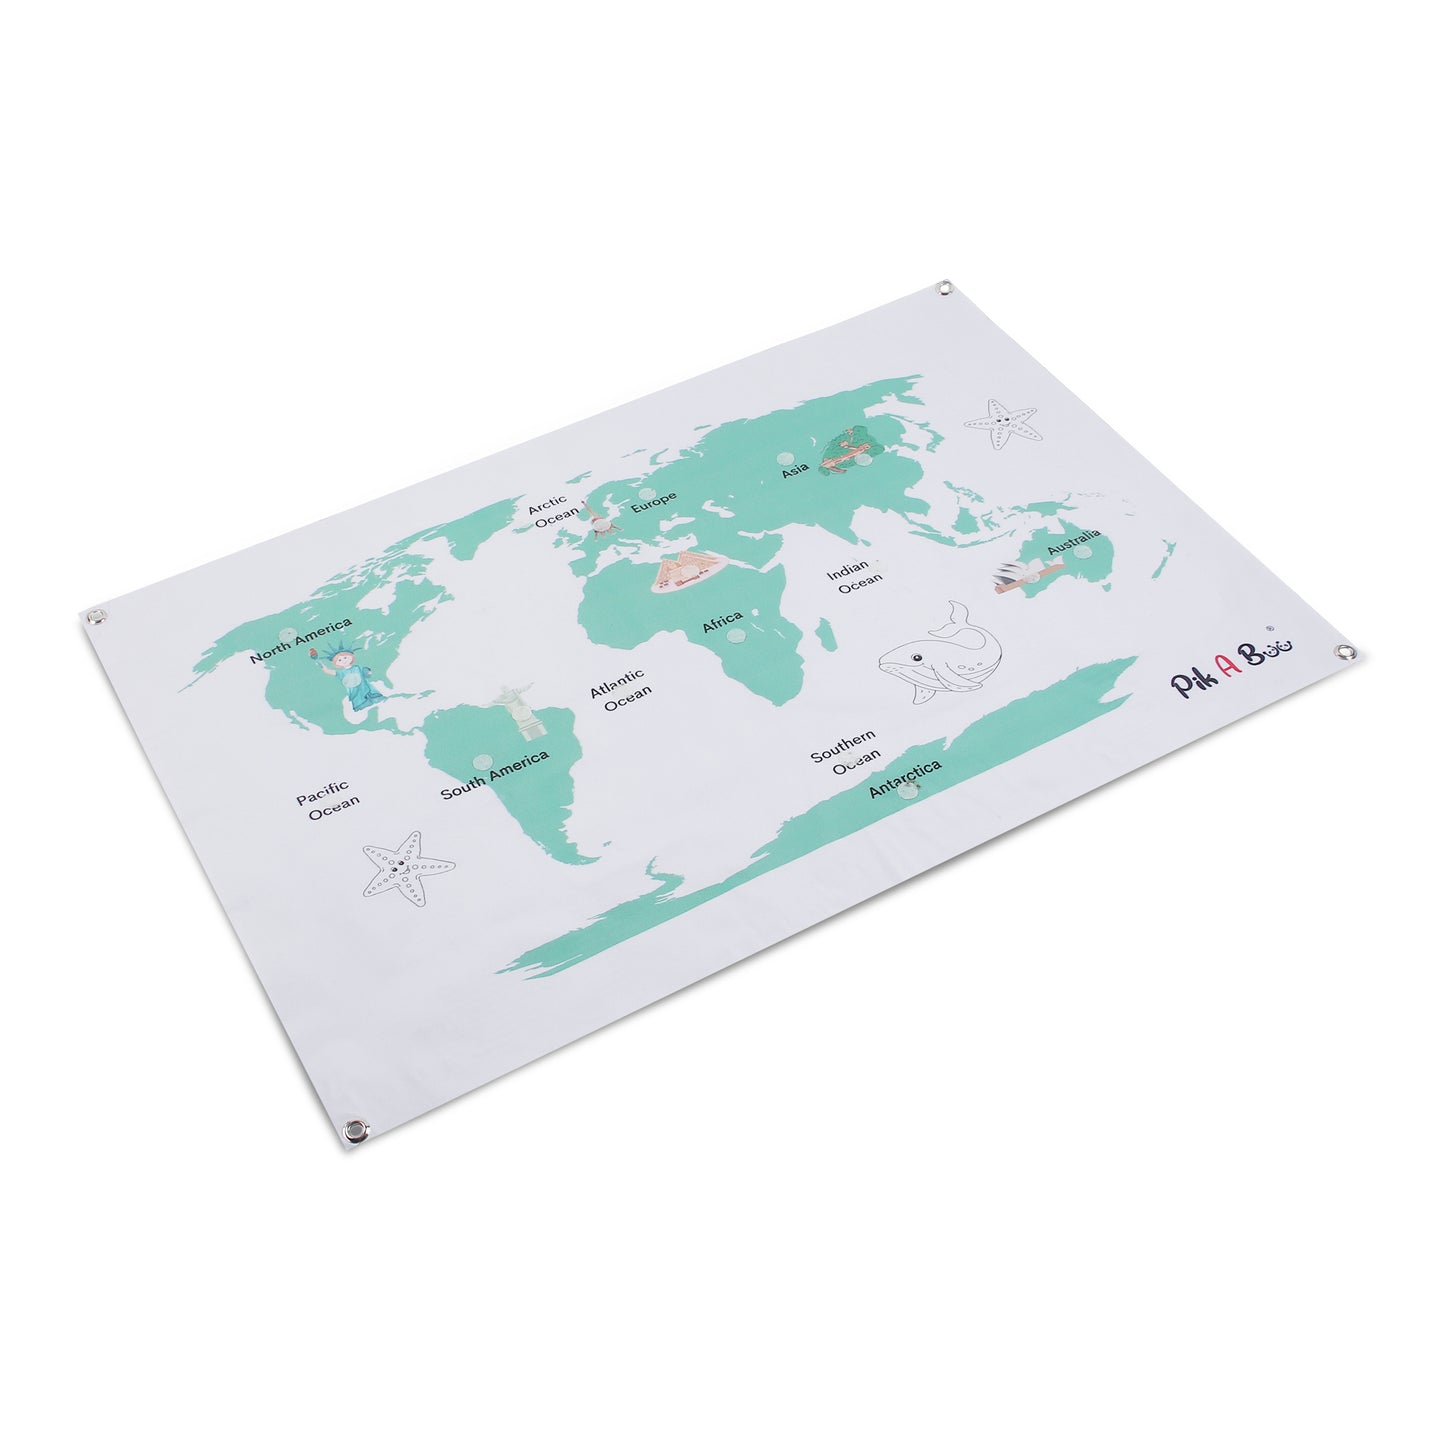 PiK A BOO Continents, Oceans and Monuments Activity Mat For Kids, Children Approx 91*60 Cm